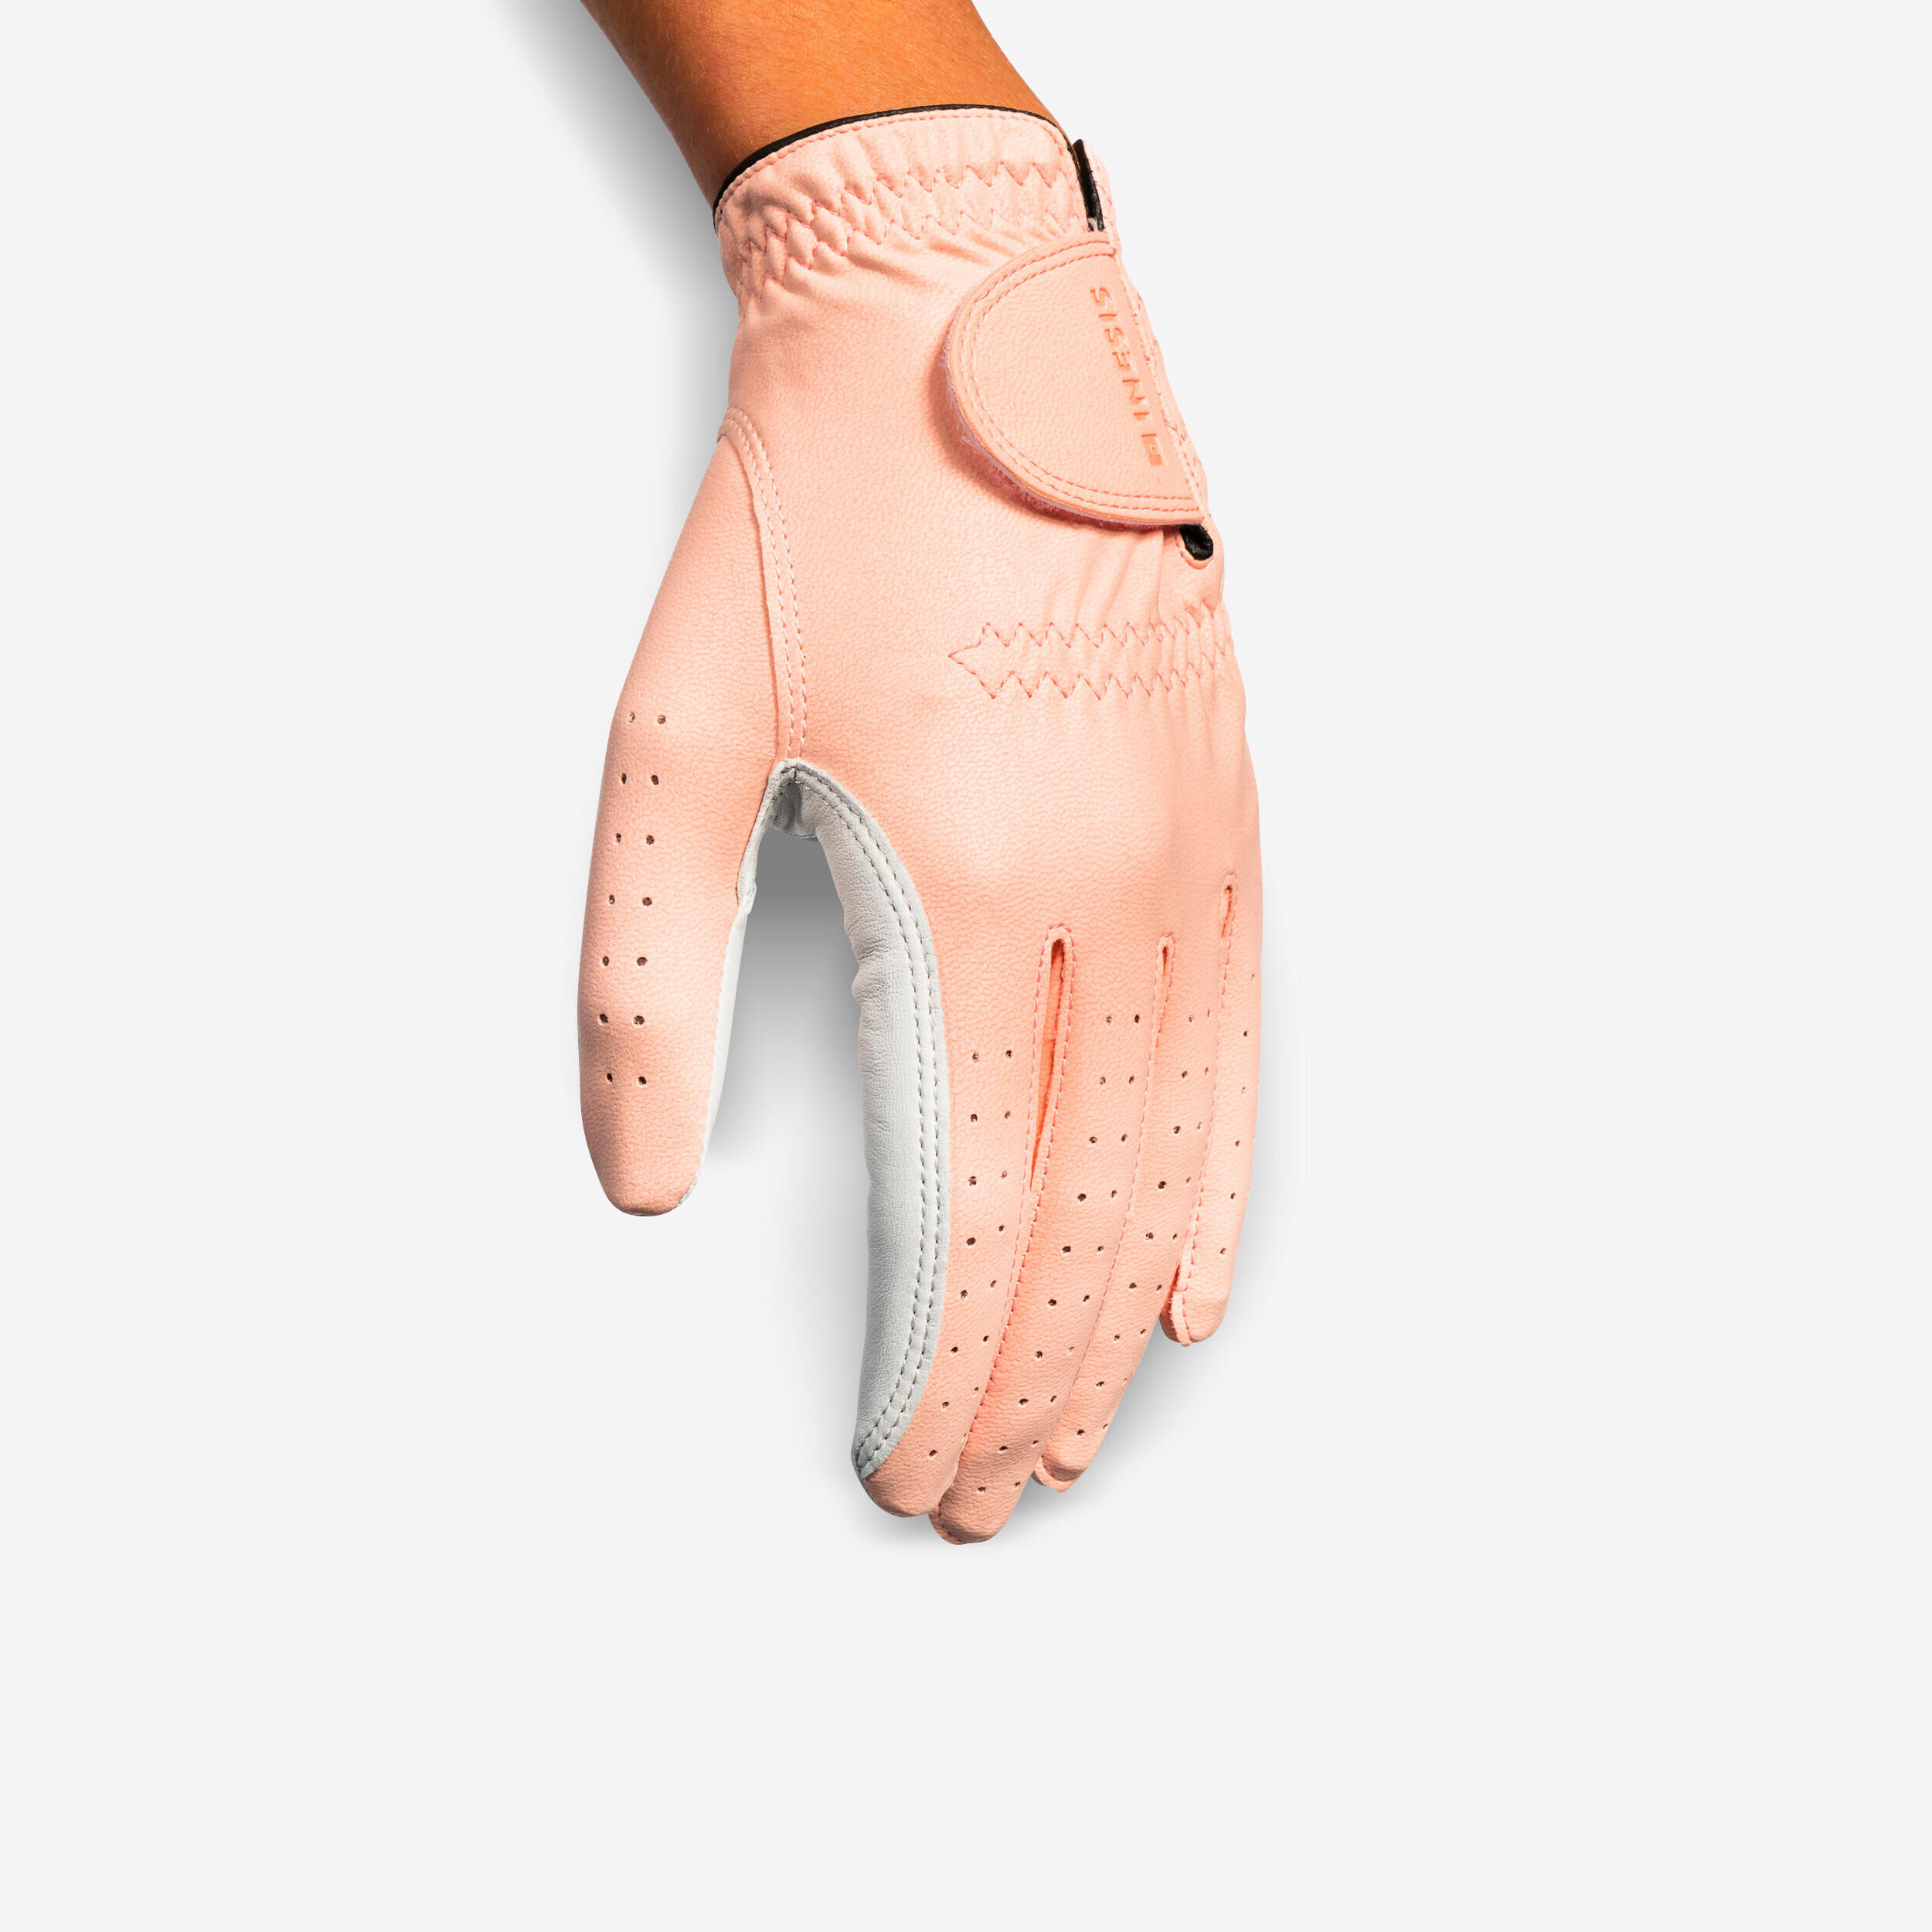 INESIS WOMEN'S GOLF GLOVE RIGHT HANDED - 500 PINK